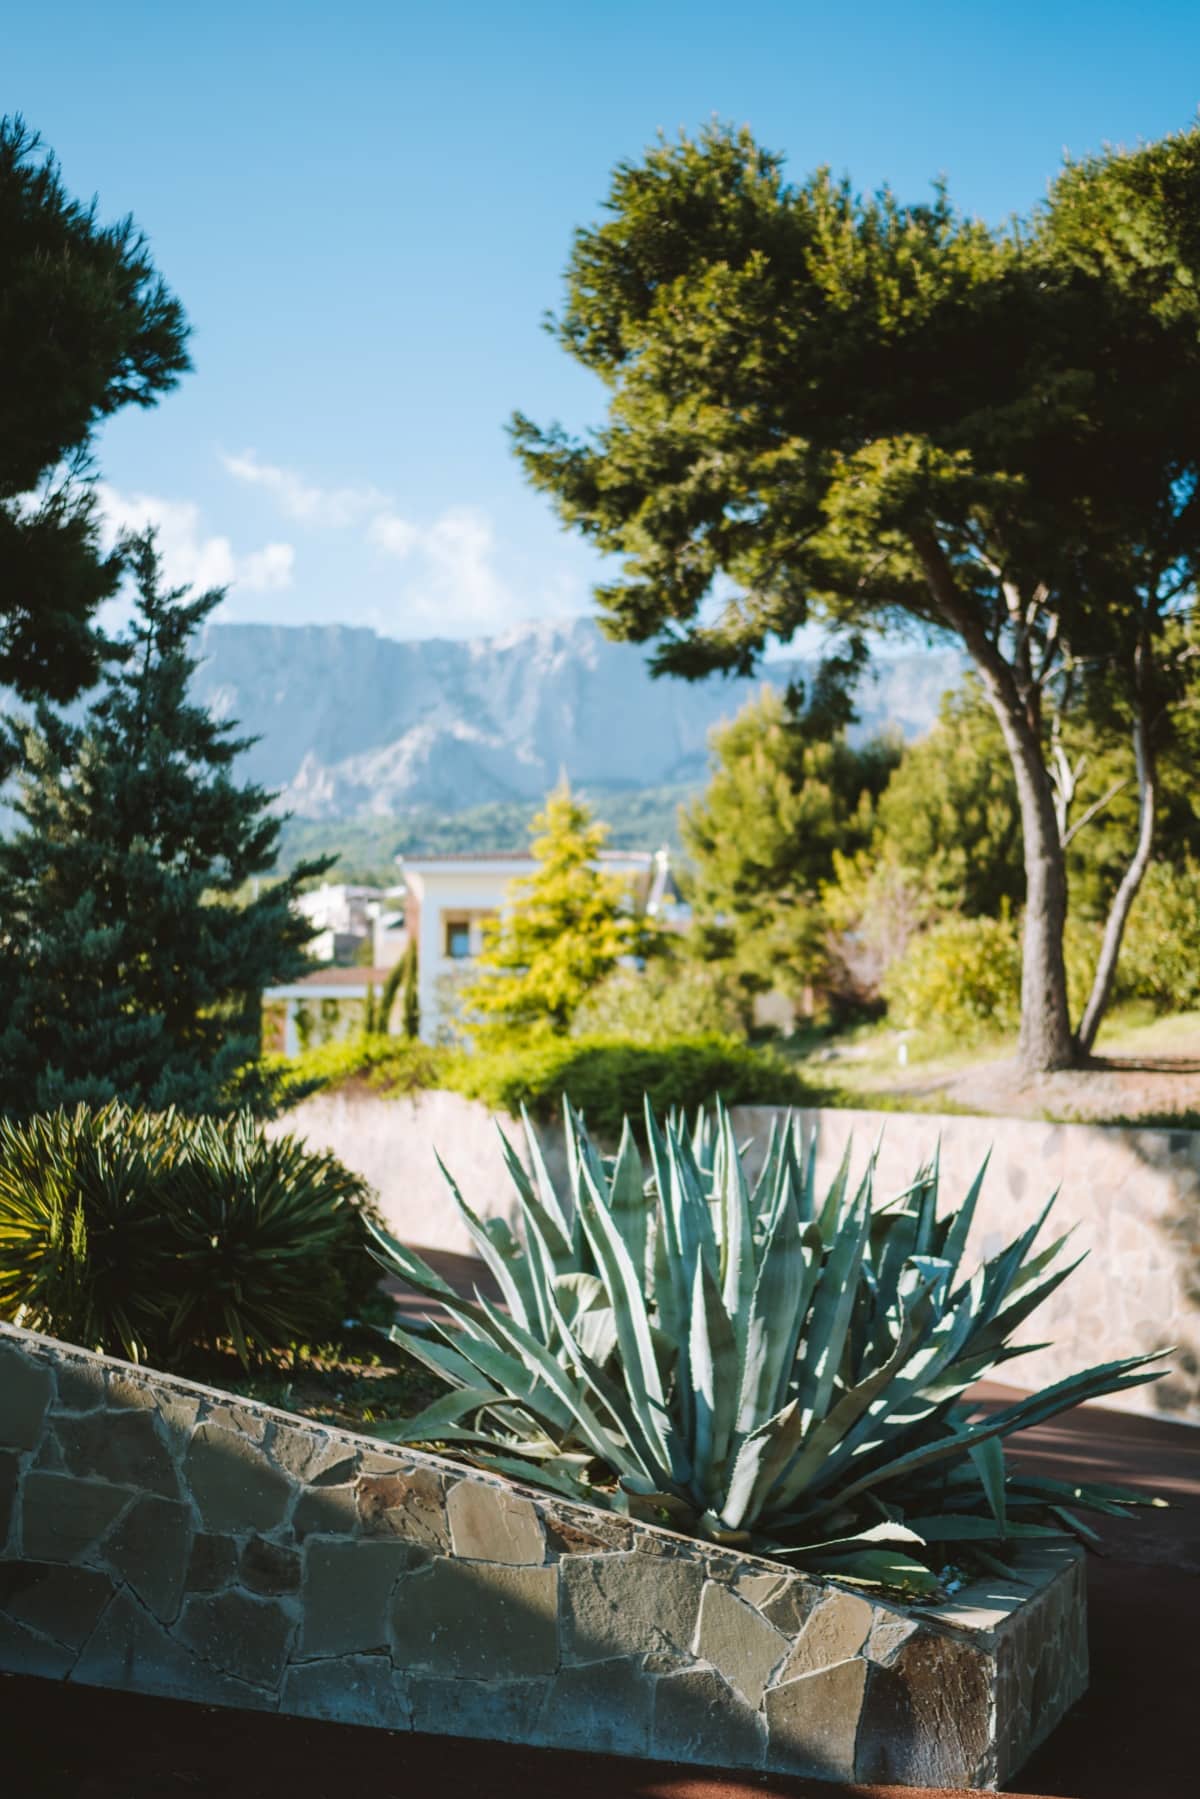 An agave tequilana plant growing in a garden